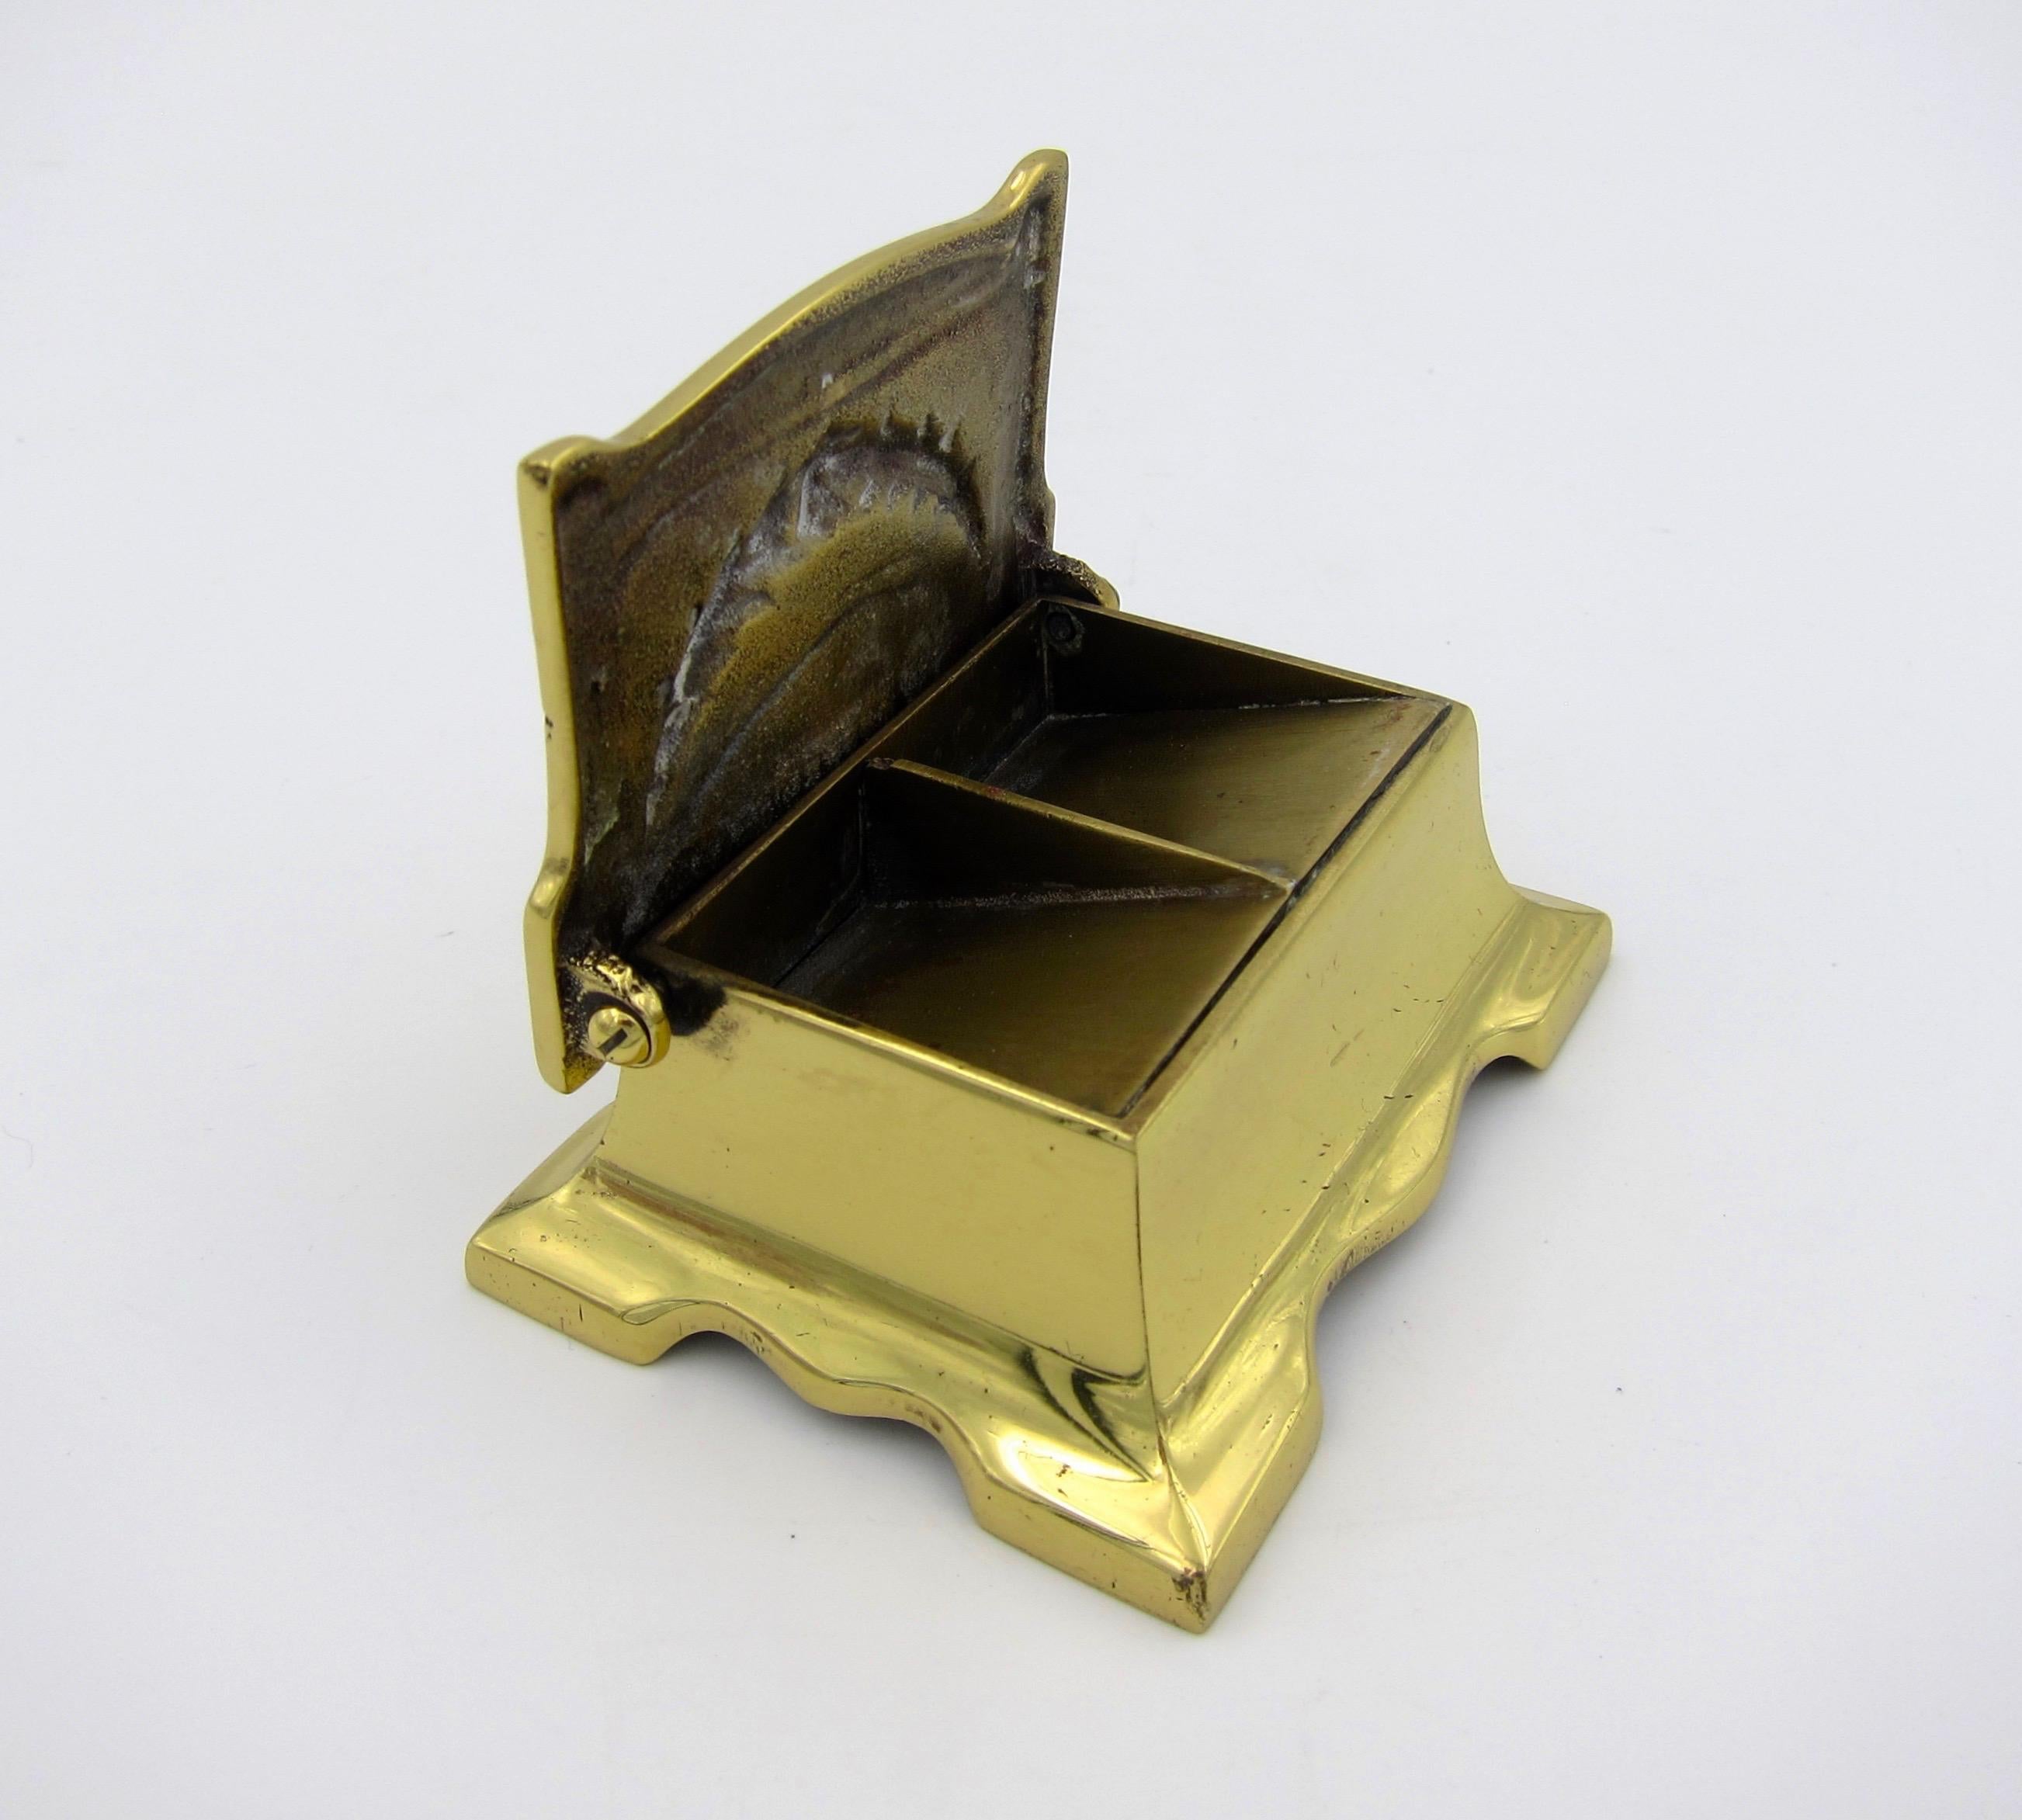 Cast Vintage Double Stamp Box in Solid Brass with Hinged Lid